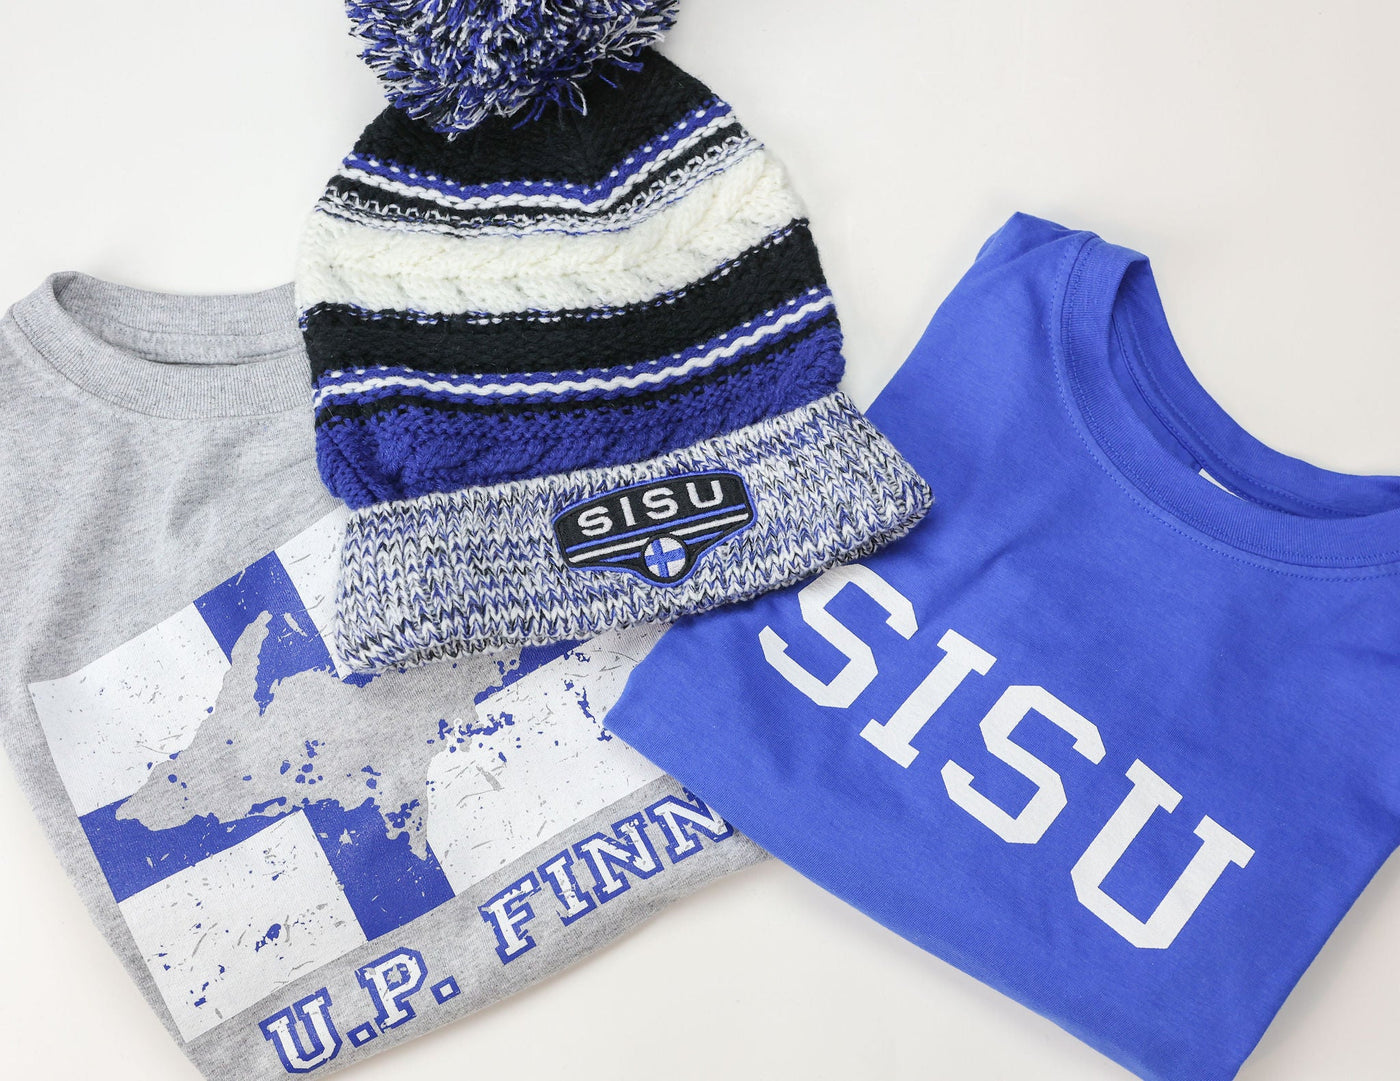 Finnish shirts and winter hat